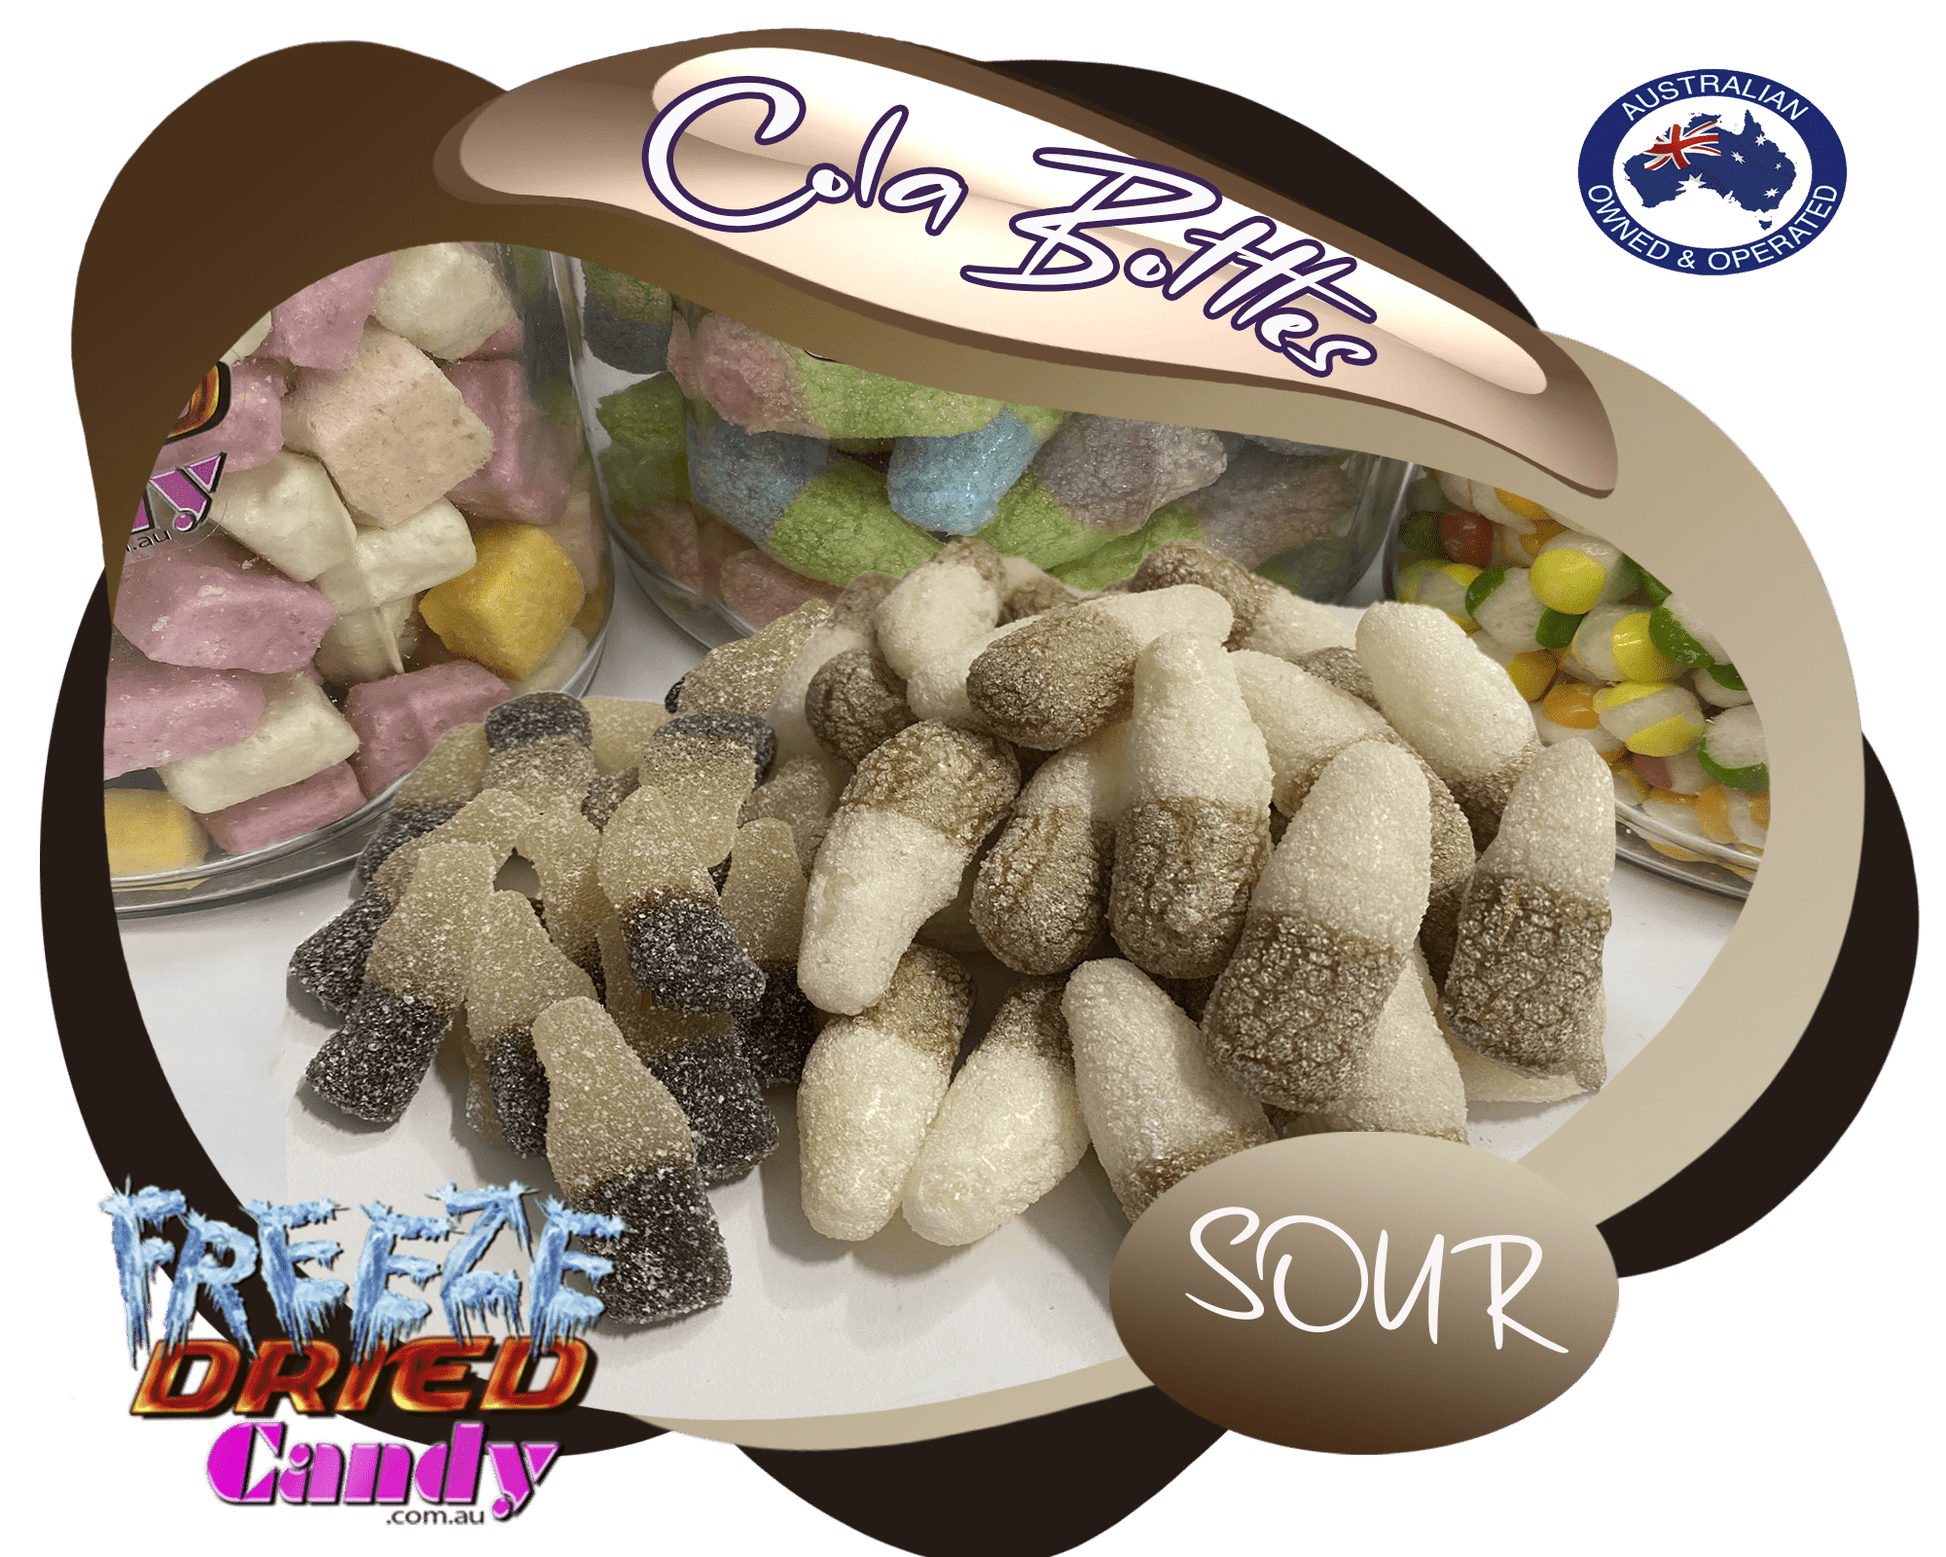 Freeze Dried Cola Coke Bottles - Sour - Freeze Dried Candy Lollies